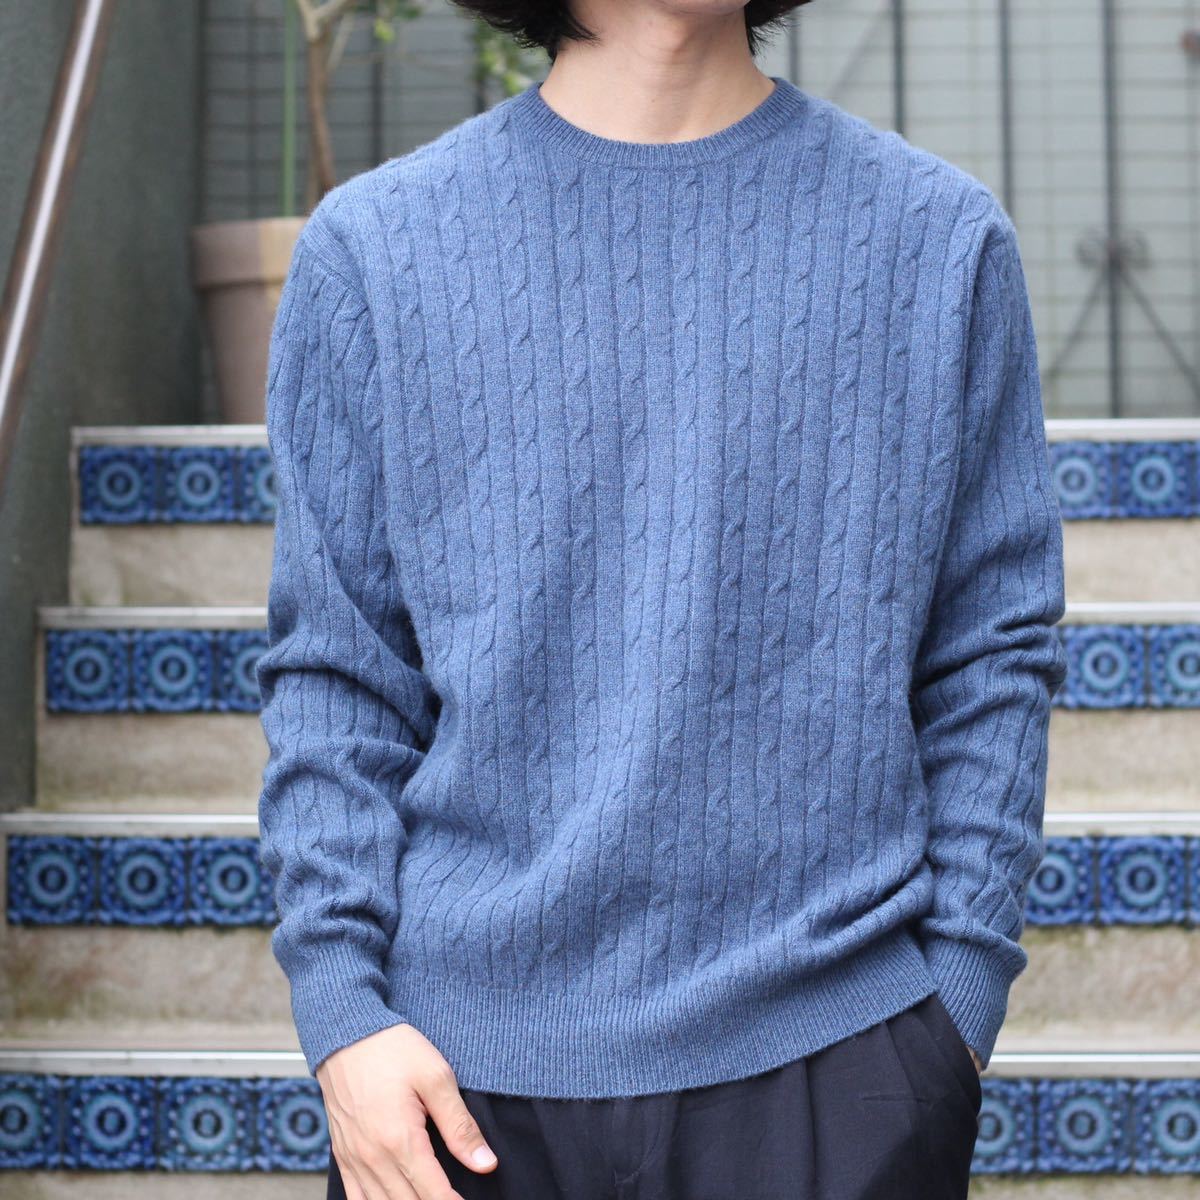 USA VINTAGE ALLEN SOLLY CABLE DESIGN CASHMERE100% KNIT/アメリカ古着ケーブルデザインカシミヤ100%ニット